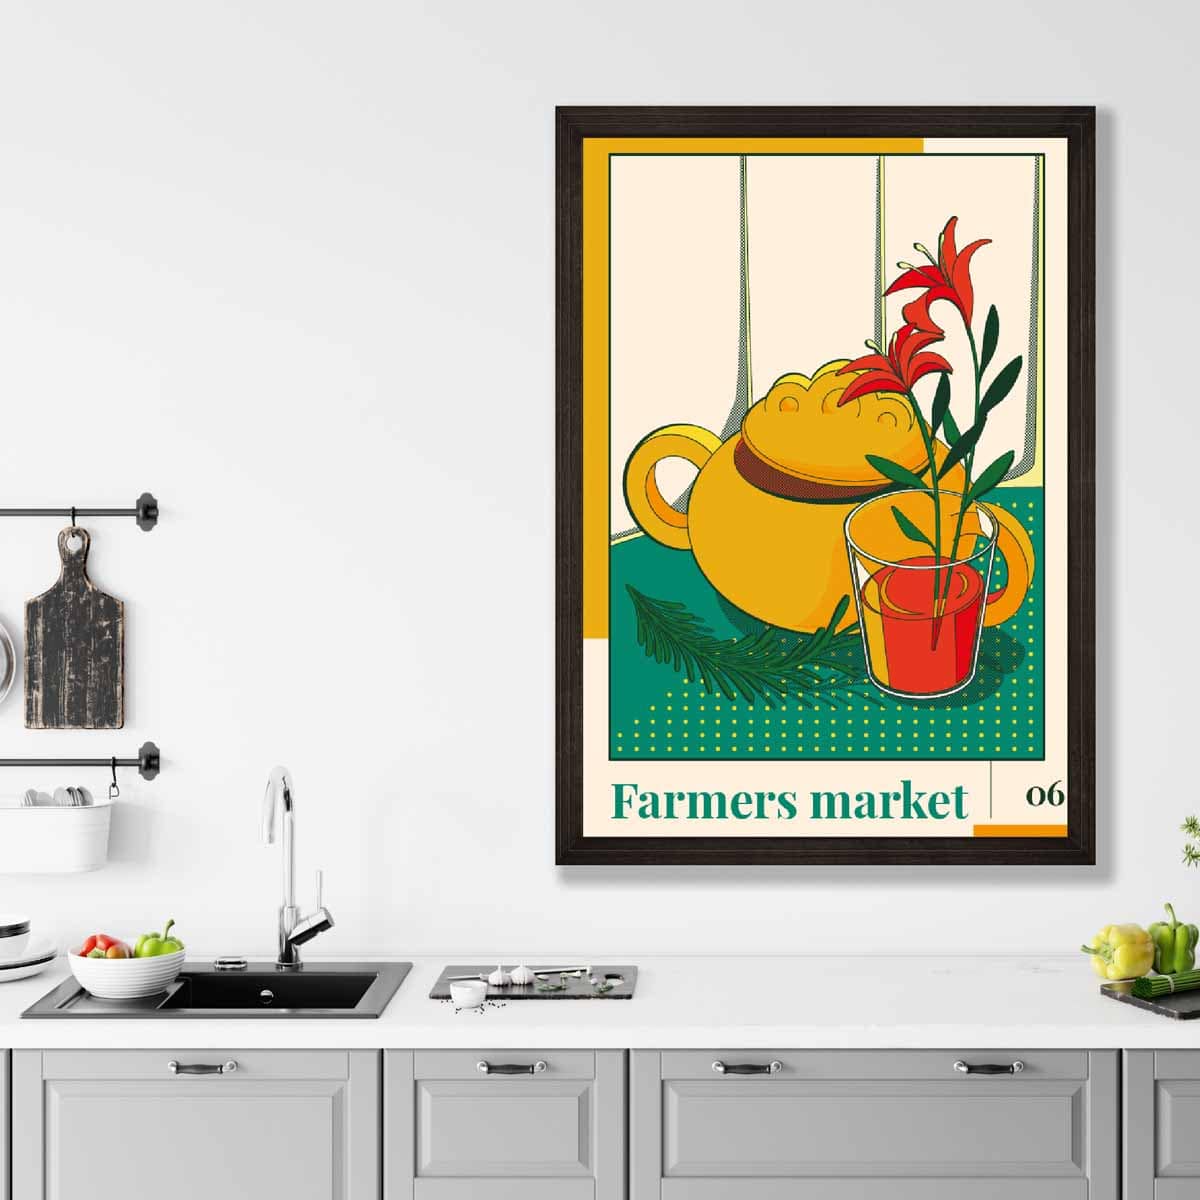 Farmers Market Poster No 6 in Green Yellow Red